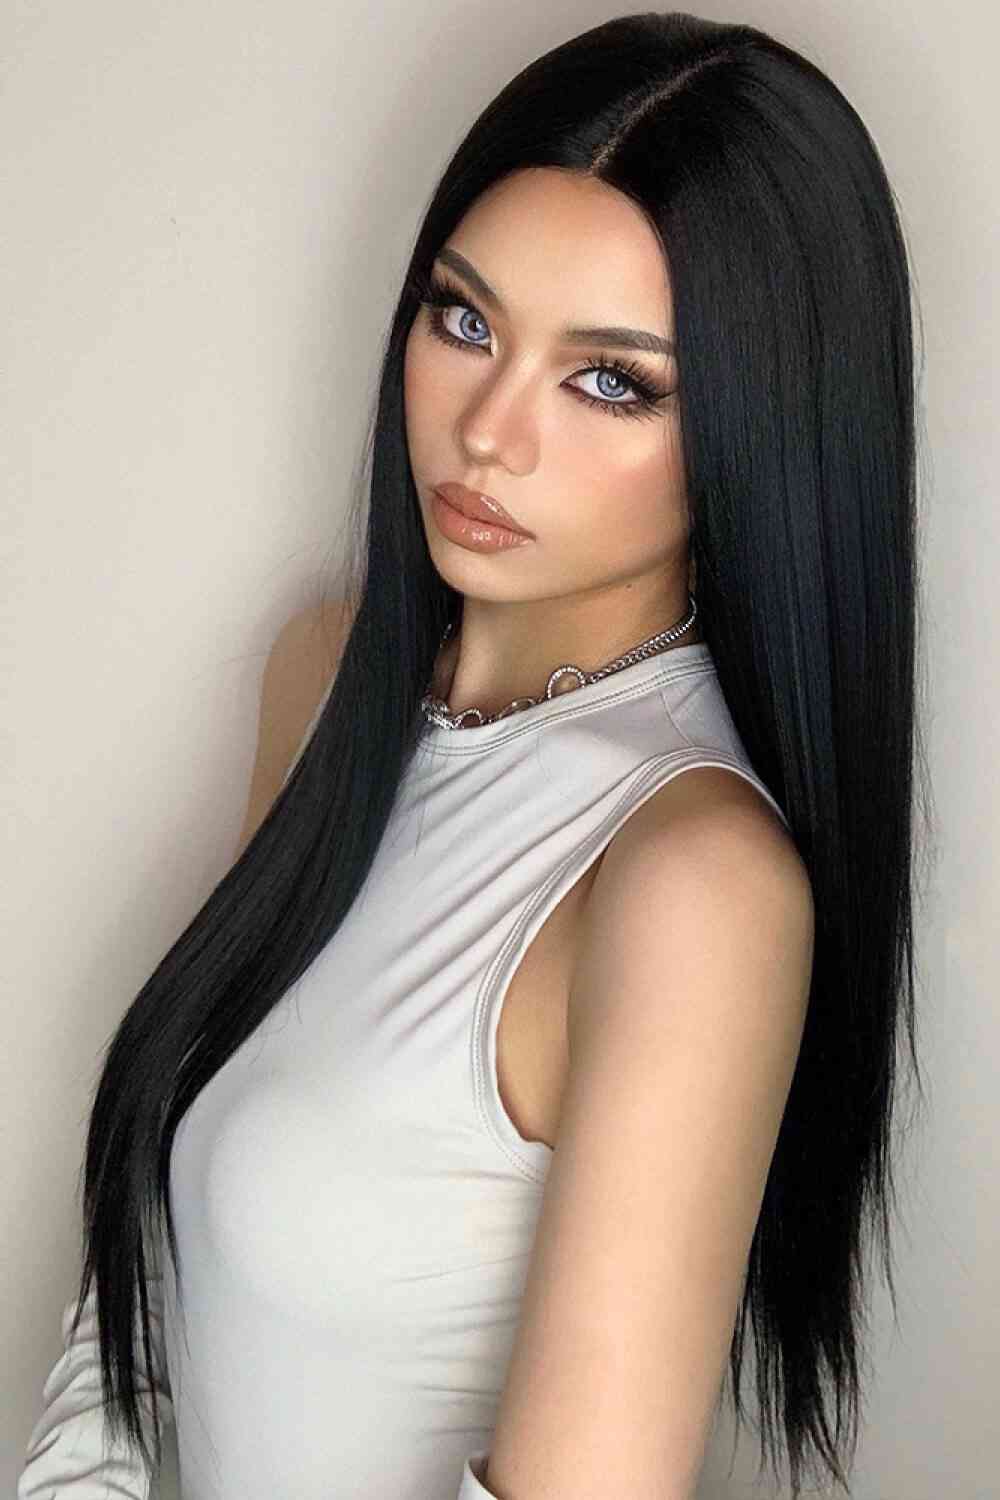 13*2" Long Lace Front Straight Synthetic Wigs 26" Long 150% Density - lolaluxeshop